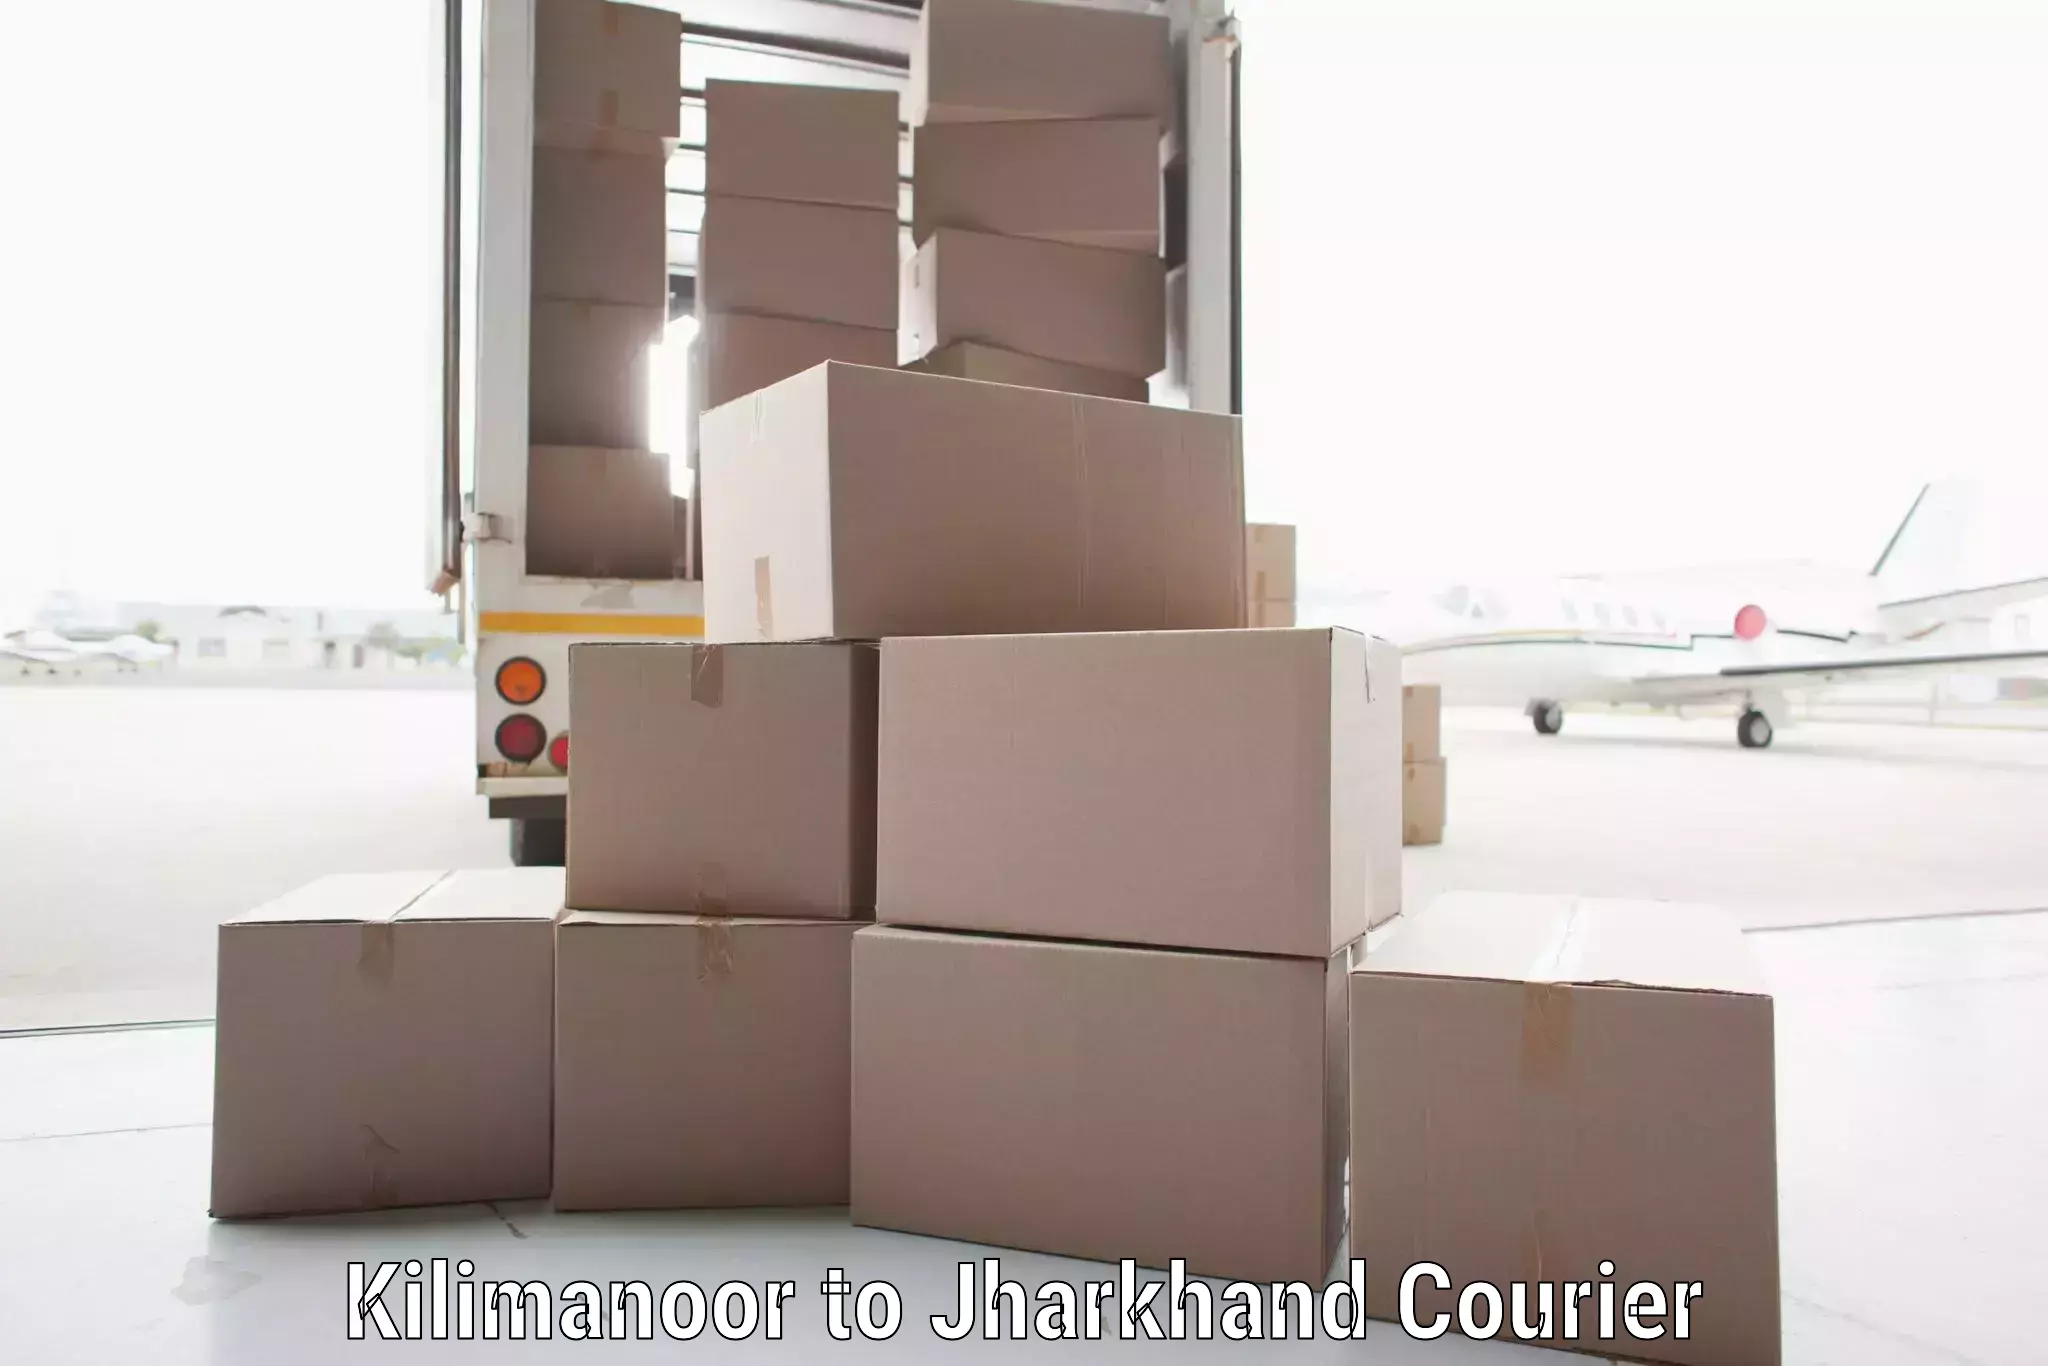 Global freight services Kilimanoor to Jamshedpur